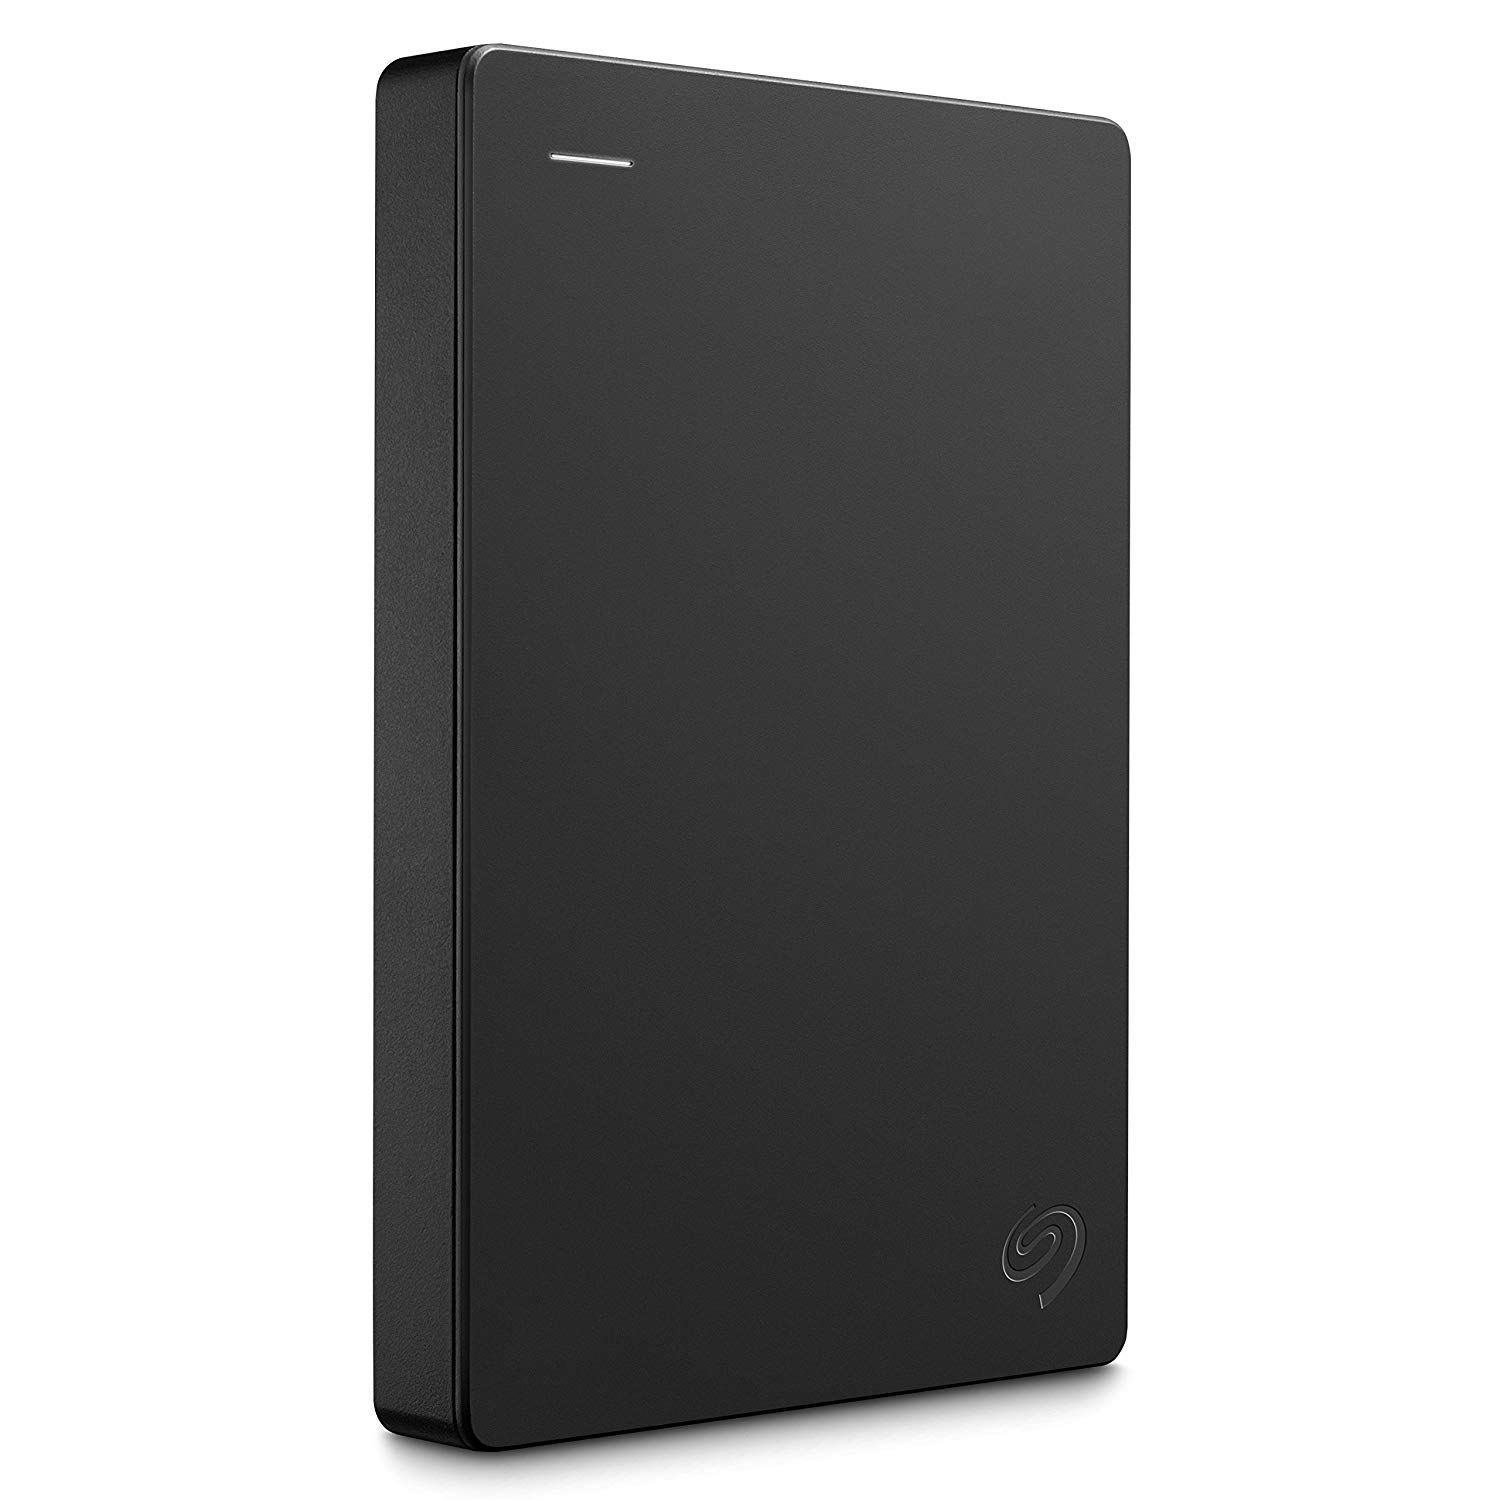 seagate external hard drive mac and pc compatible